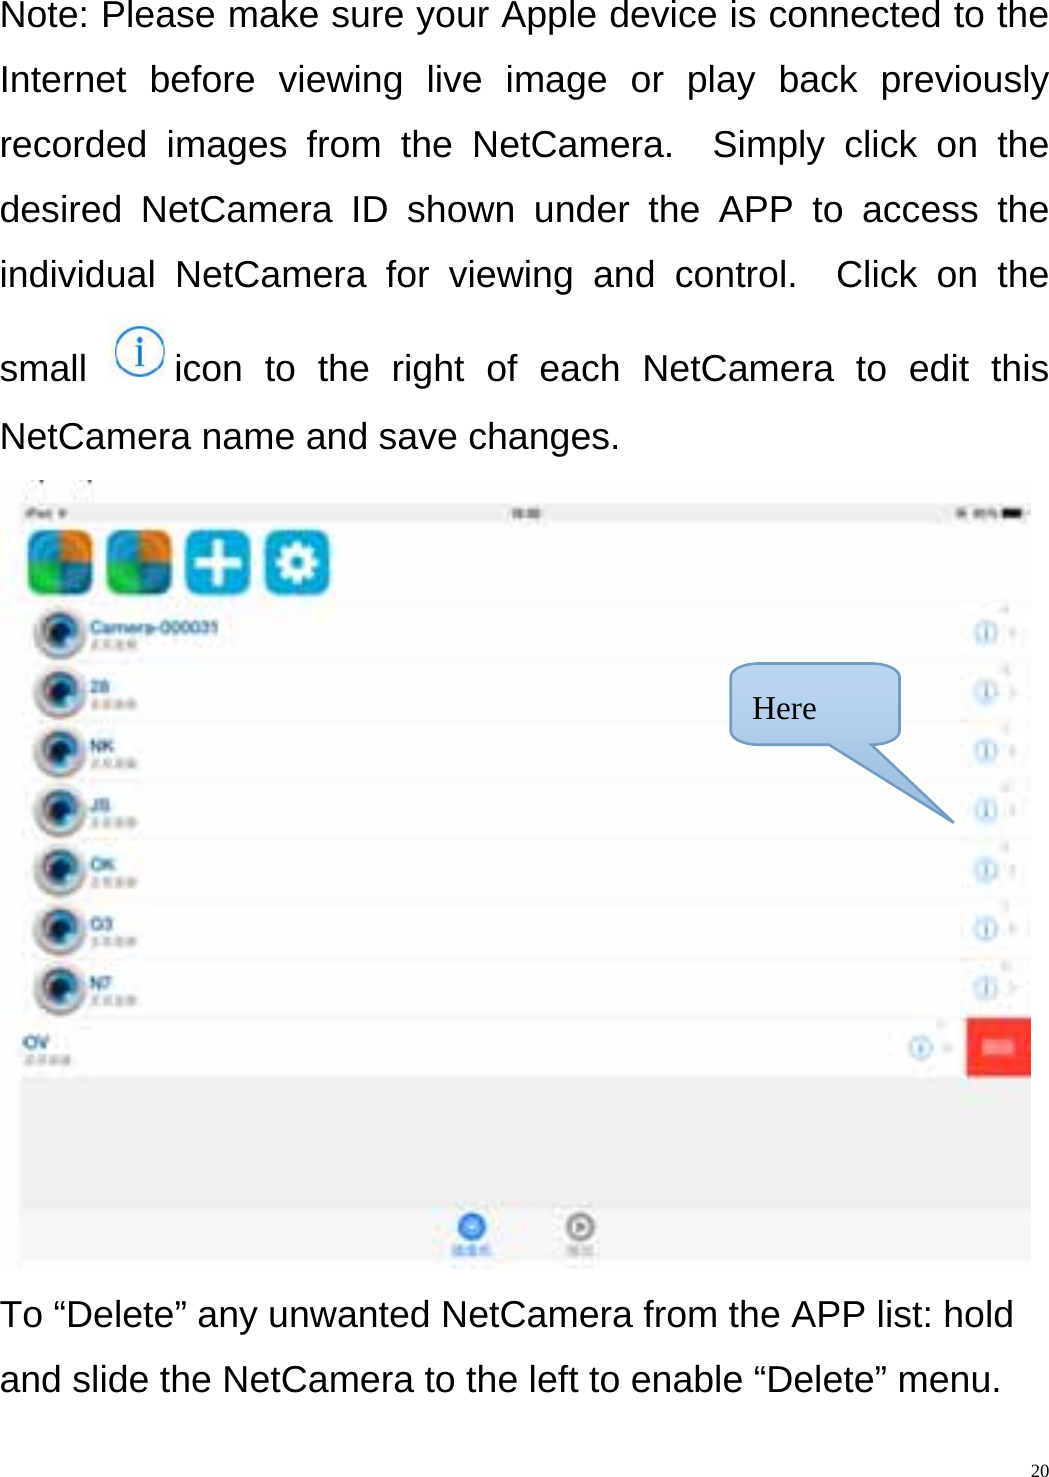    20Note: Please make sure your Apple device is connected to the Internet before viewing live image or play back previously recorded images from the NetCamera.  Simply click on the desired NetCamera ID shown under the APP to access the individual NetCamera for viewing and control.  Click on the small  icon to the right of each NetCamera to edit this NetCamera name and save changes.  To “Delete” any unwanted NetCamera from the APP list: hold and slide the NetCamera to the left to enable “Delete” menu.Here 